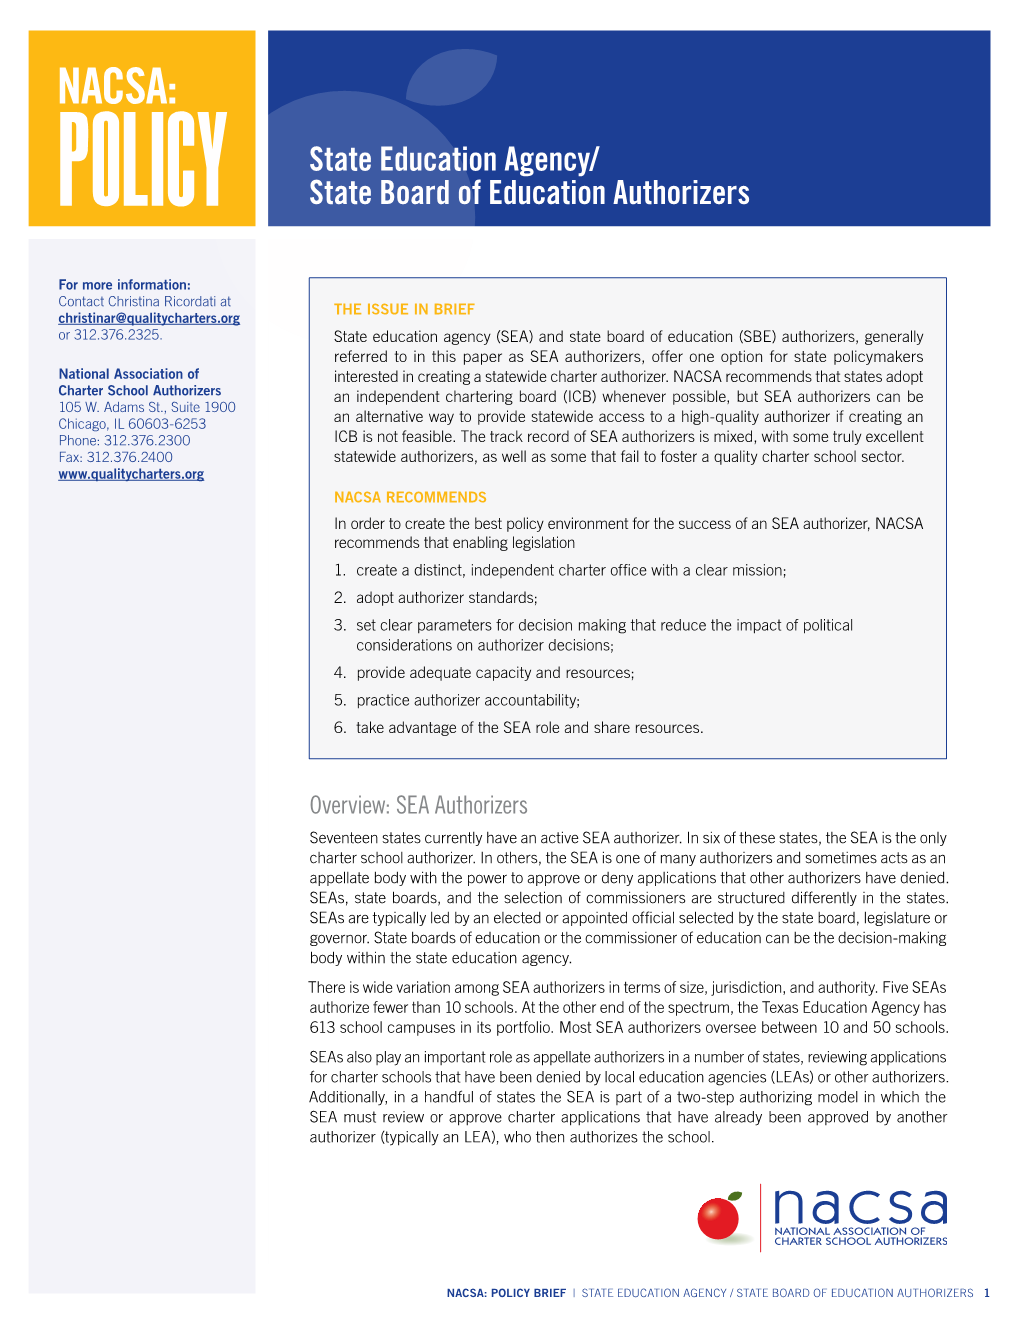 State Education Agency/ State Board of Education Authorizers